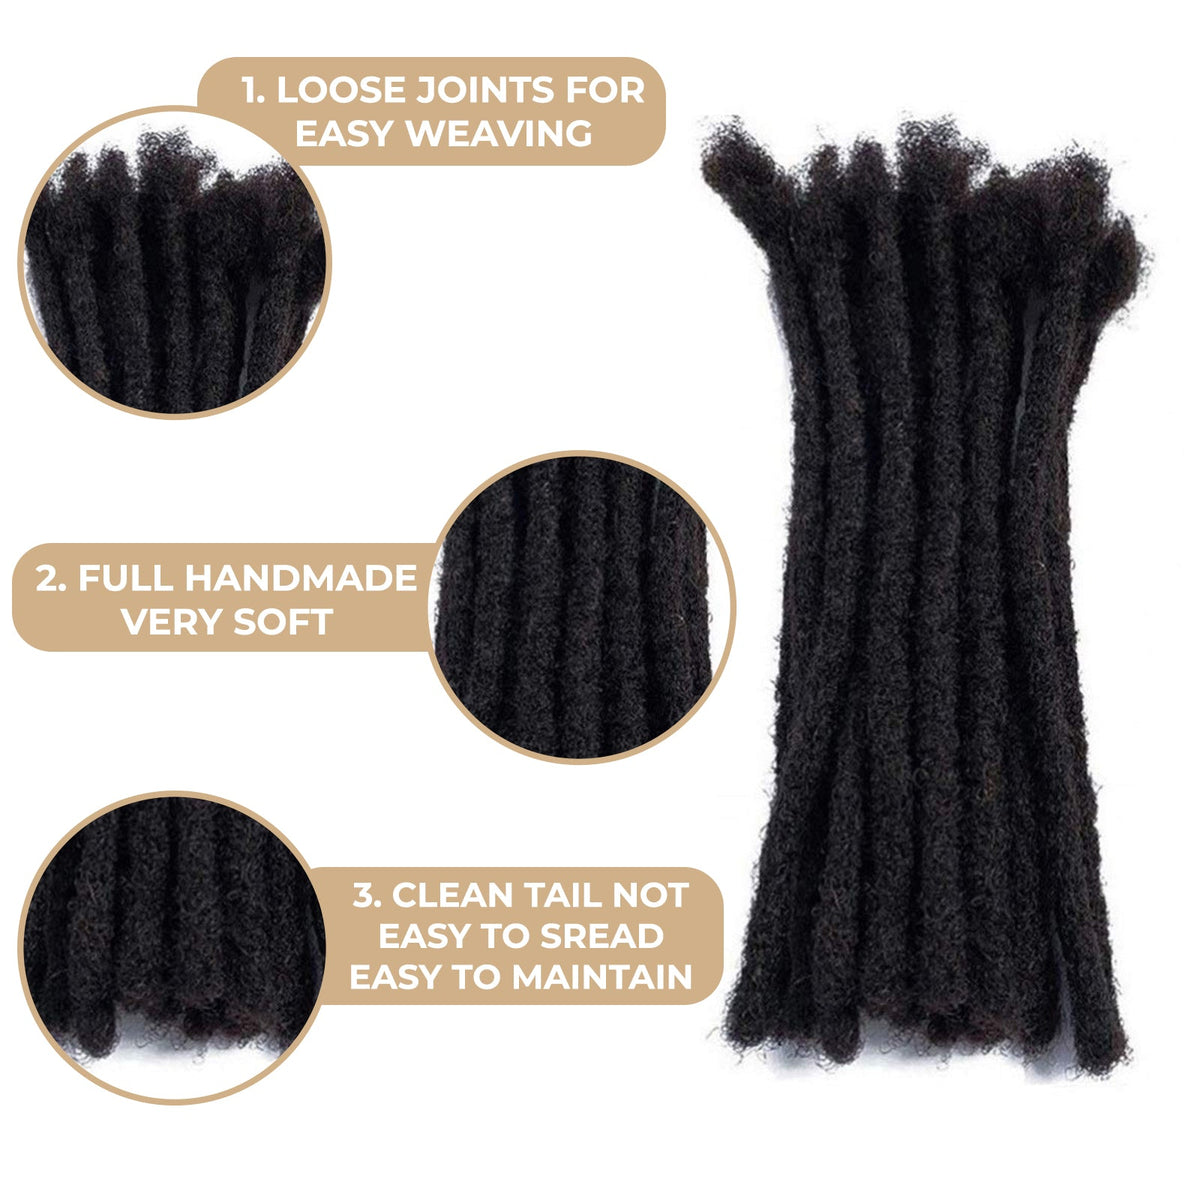 100% Human Hair Dreadlock Extensions 16Inch 10 Strands Handmade Natural Loc Extensions Human Hair Bundle Dreads Extensions For Woman&Men Can be Dyed & Bleached Natural Black 16inch length 0.6cm Width